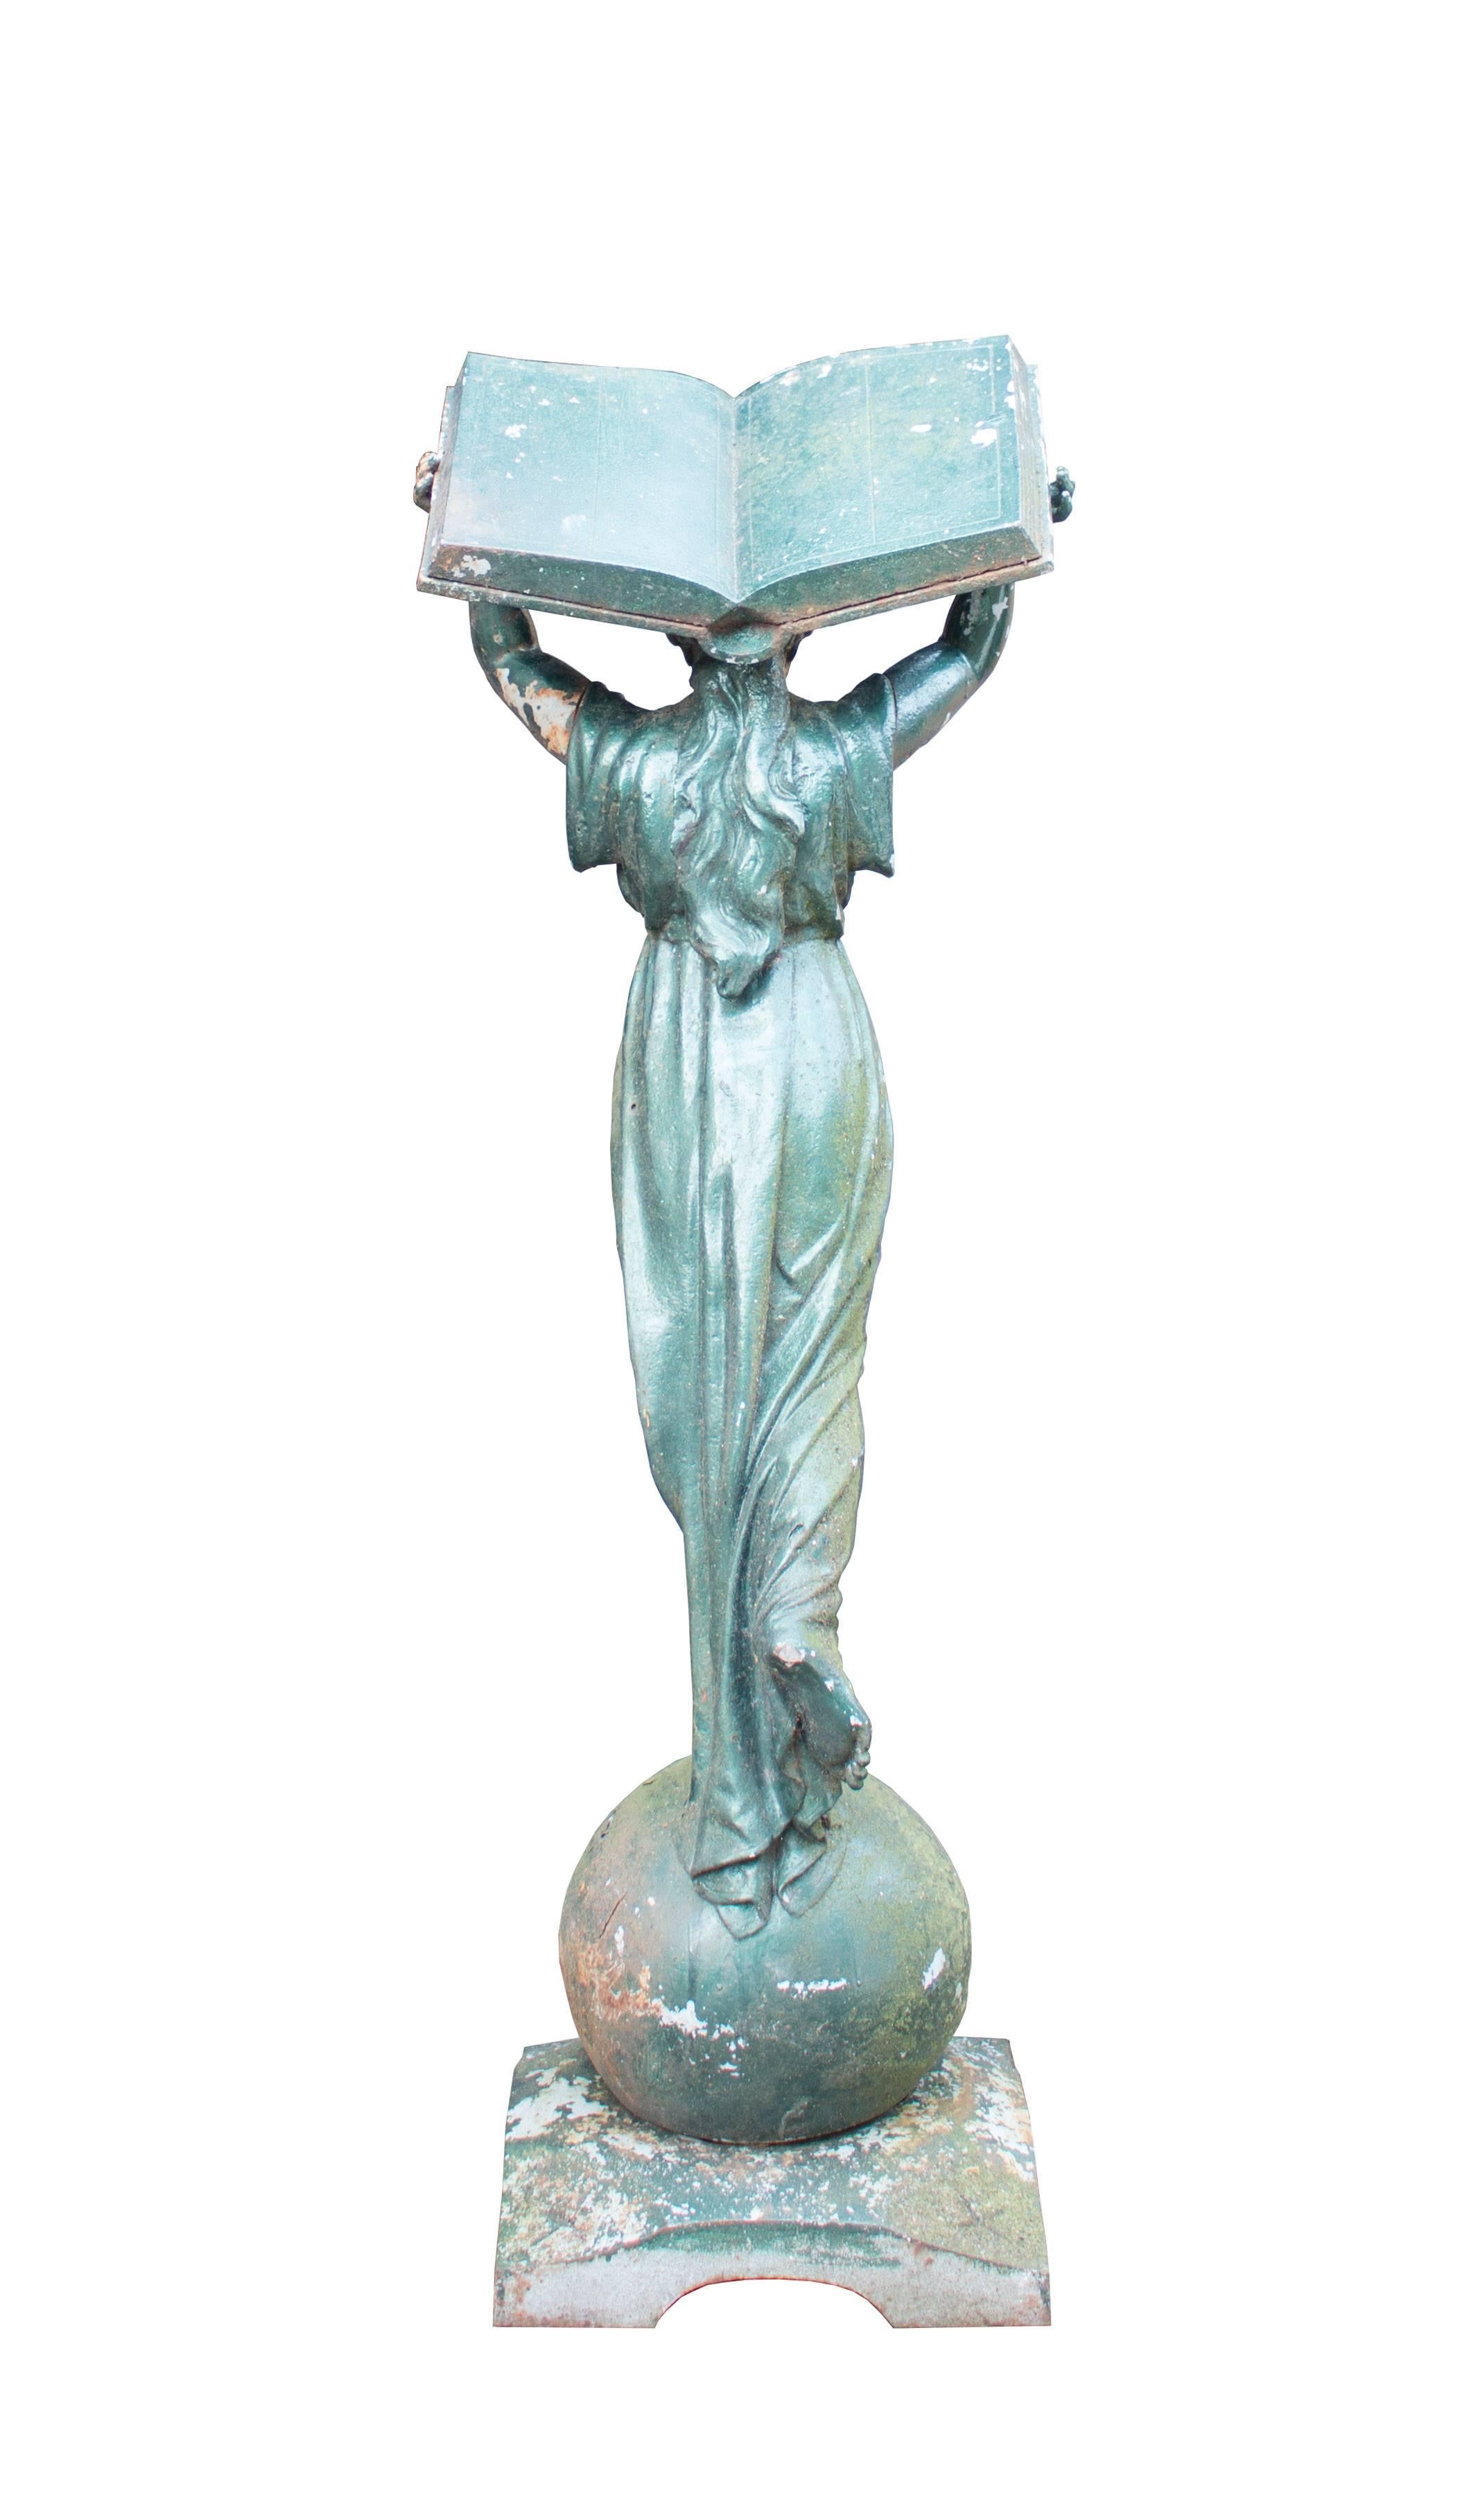 British Lectern in the Form of a Woman Holding Aloft the Book of Knowledge